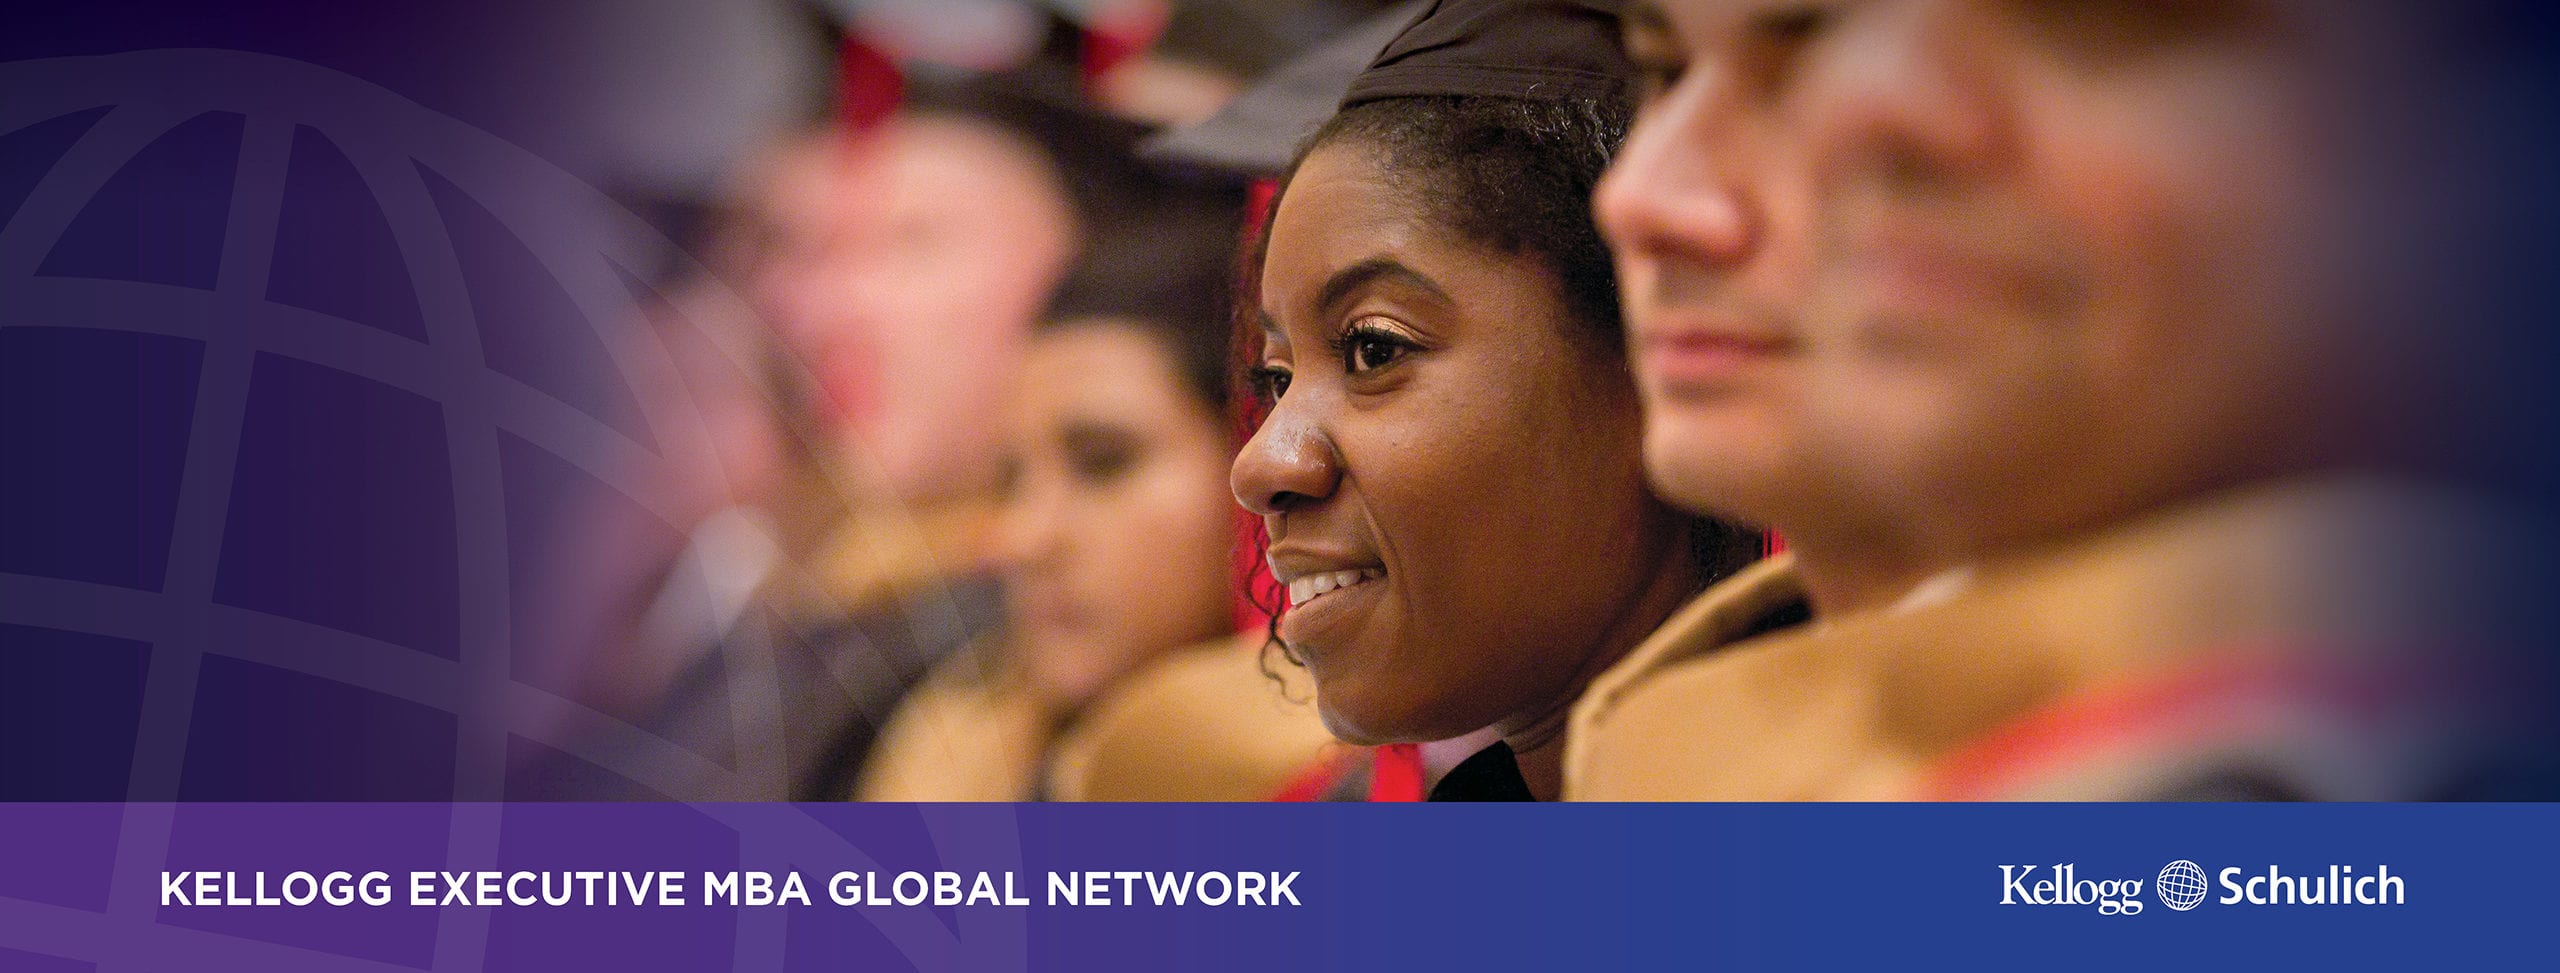 Kellogg Executive MBA Global Network - Schulich